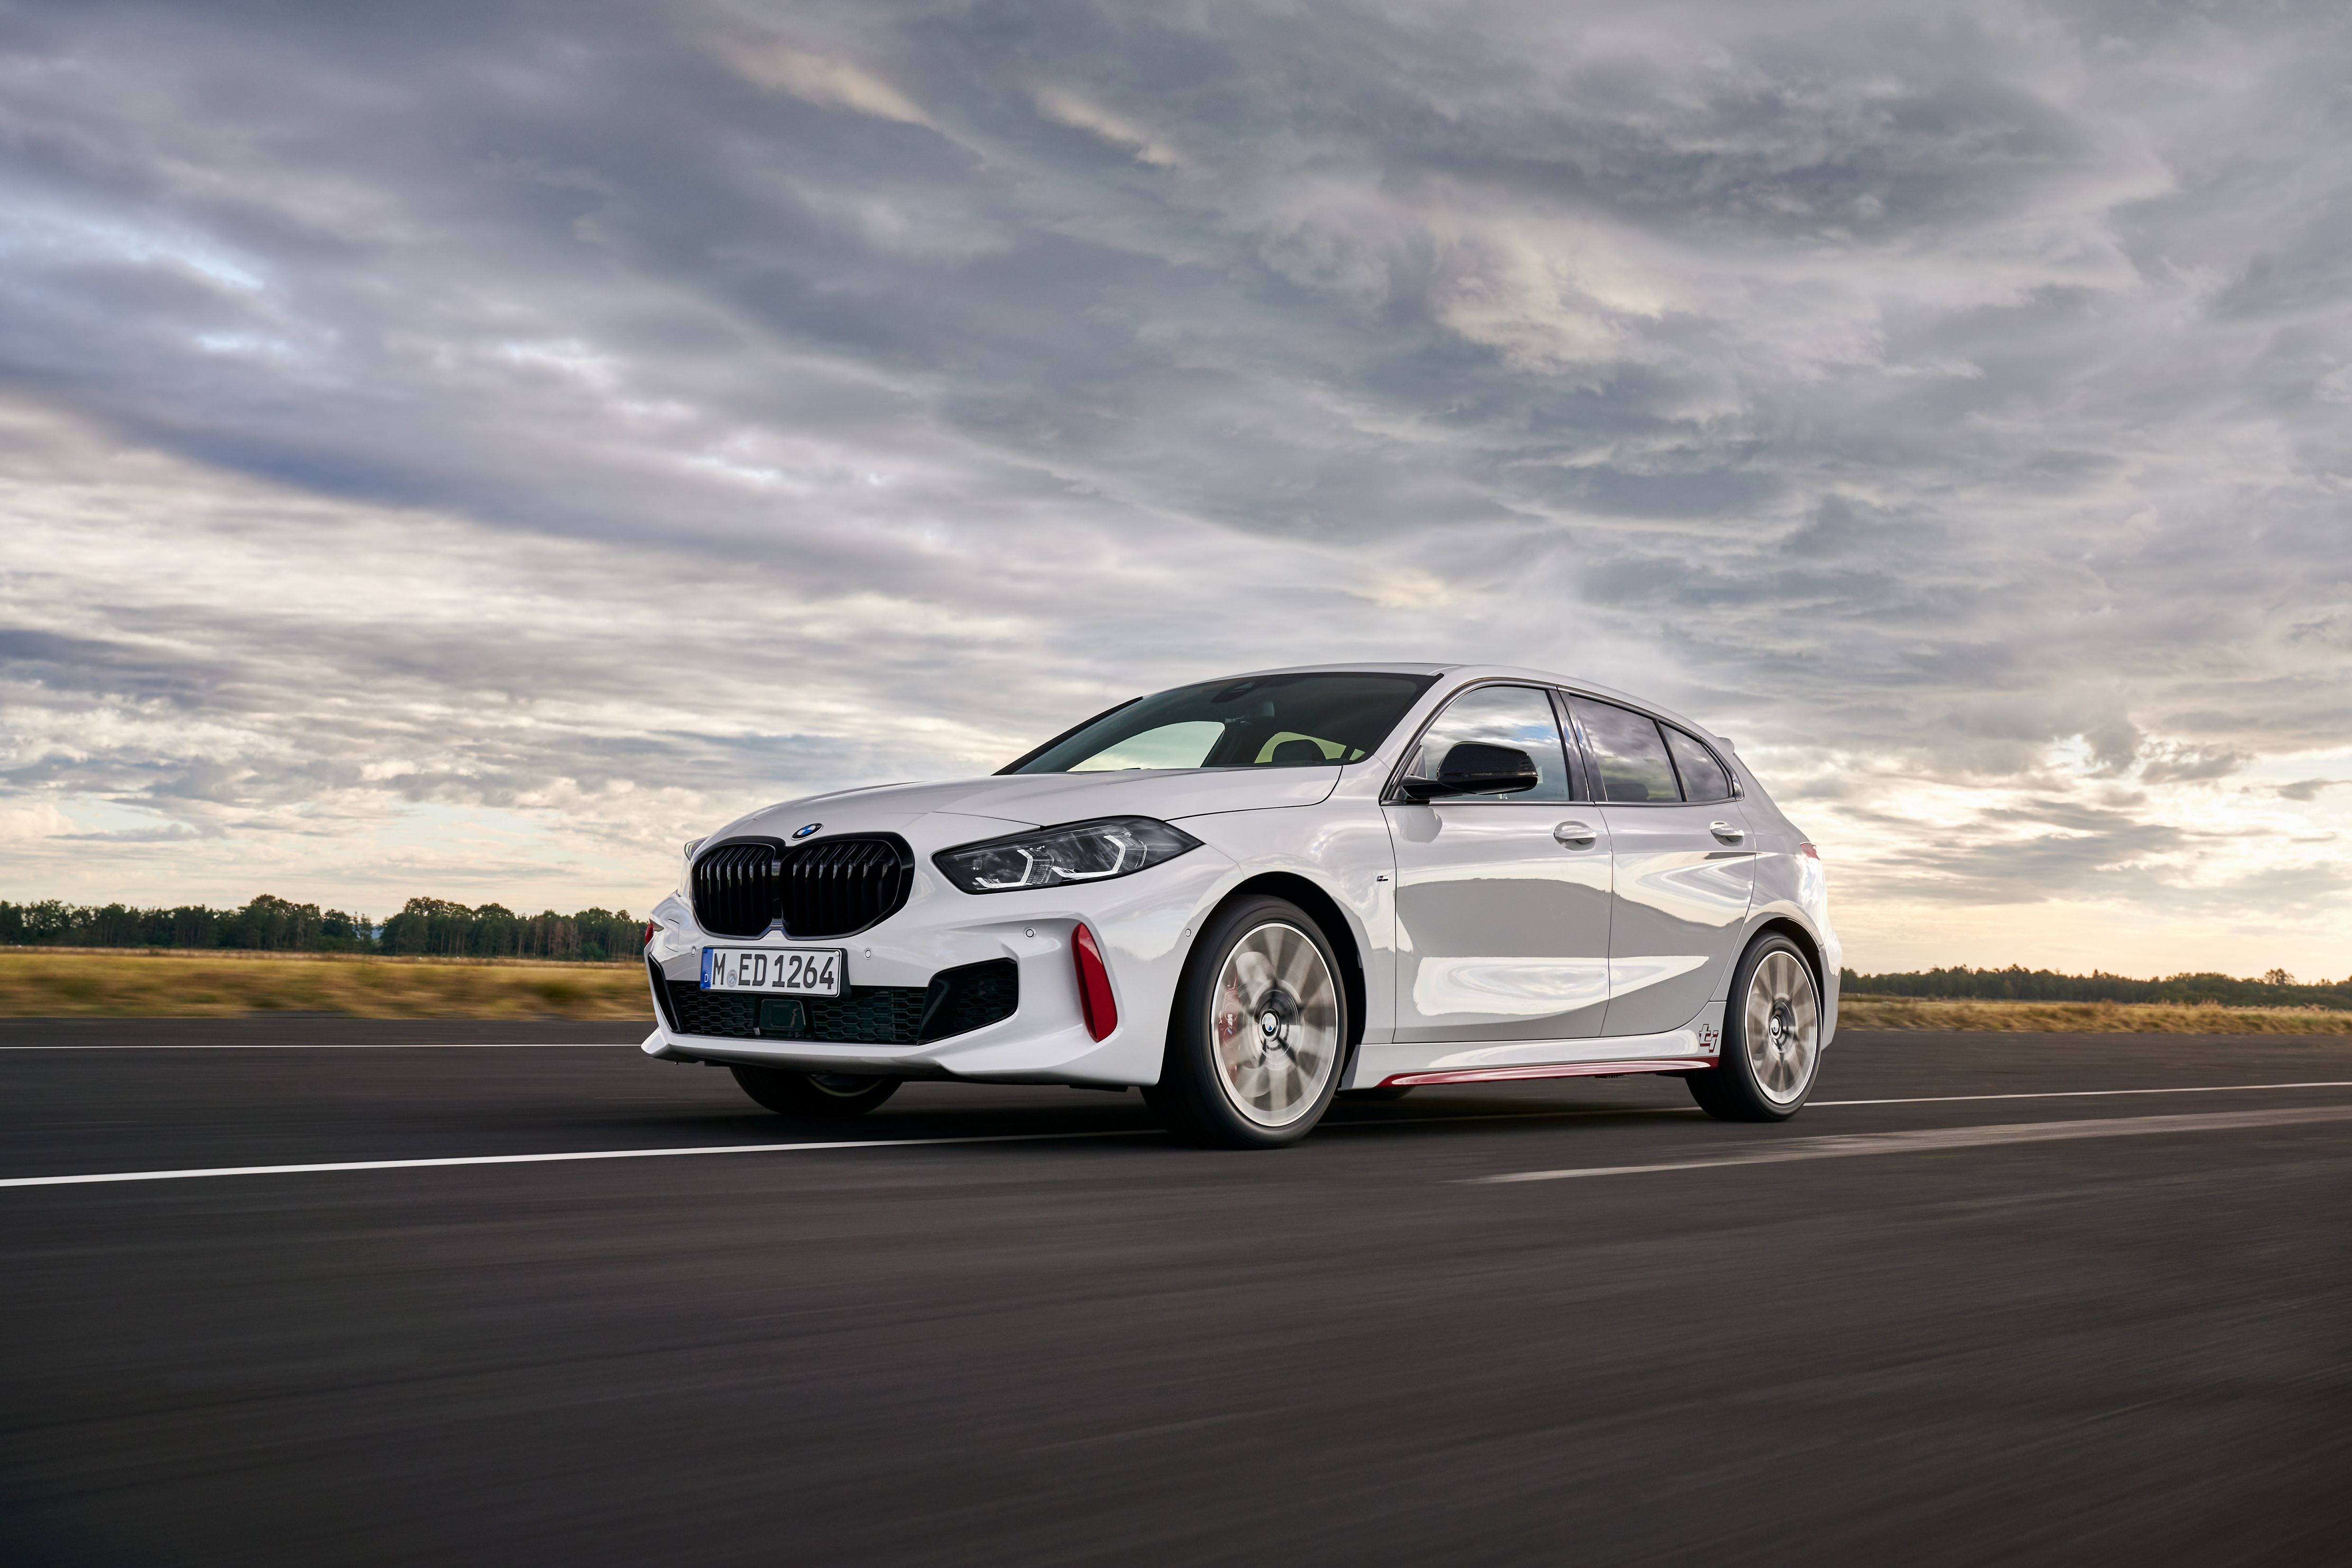 2021 The 2021 BMW 128ti Is a Detuned M135i Aimed at the VW Golf GTI